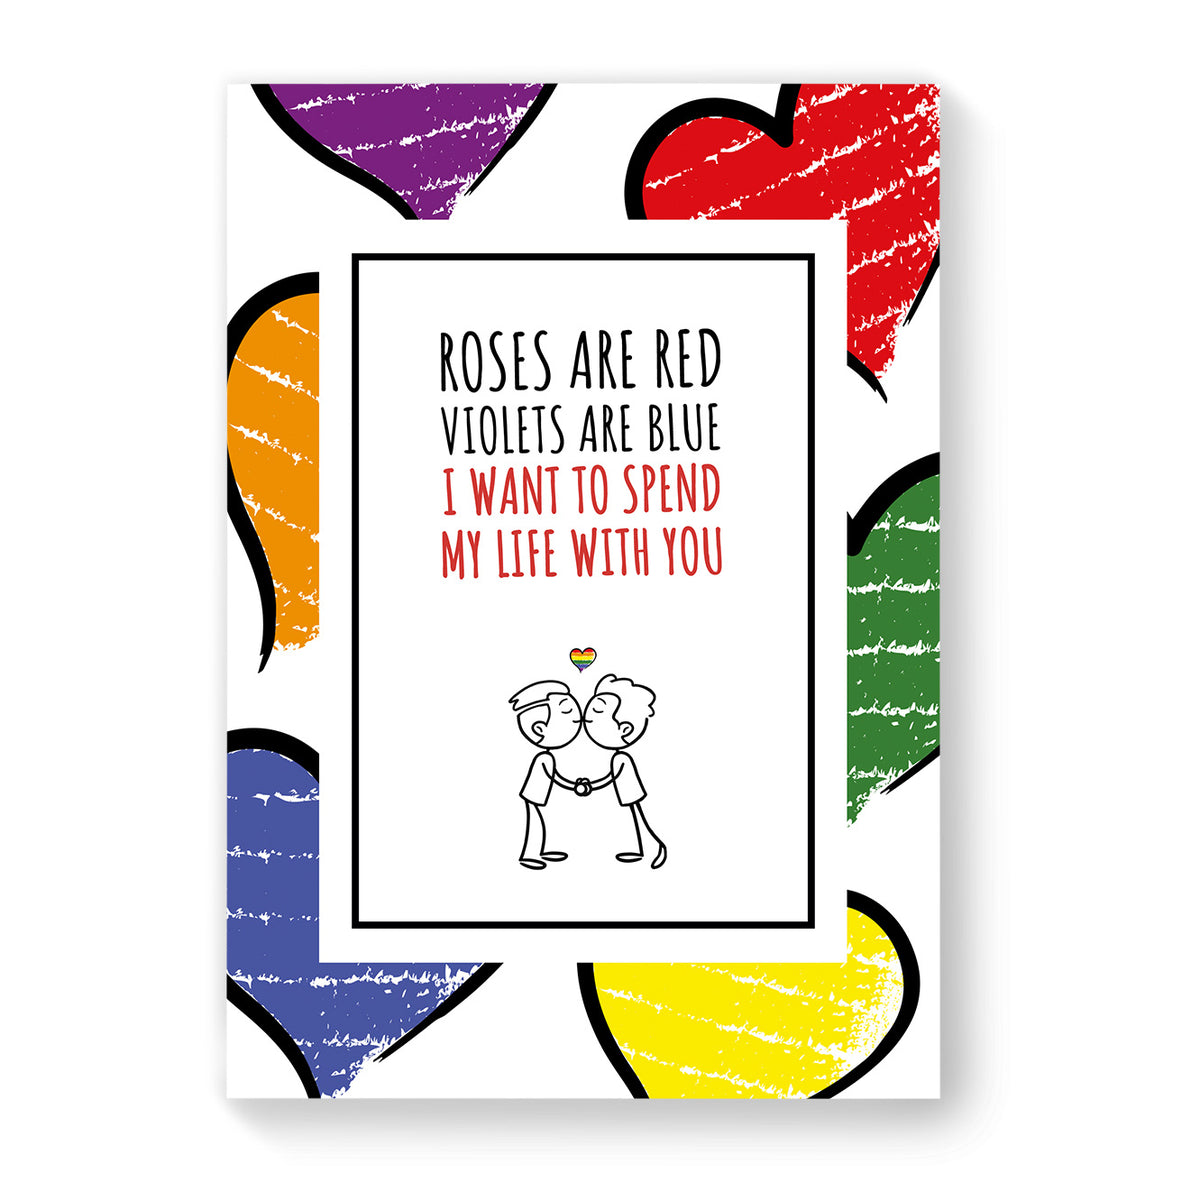 I want to spend my life with you - Gay Couple Card - Large Heart | Gift